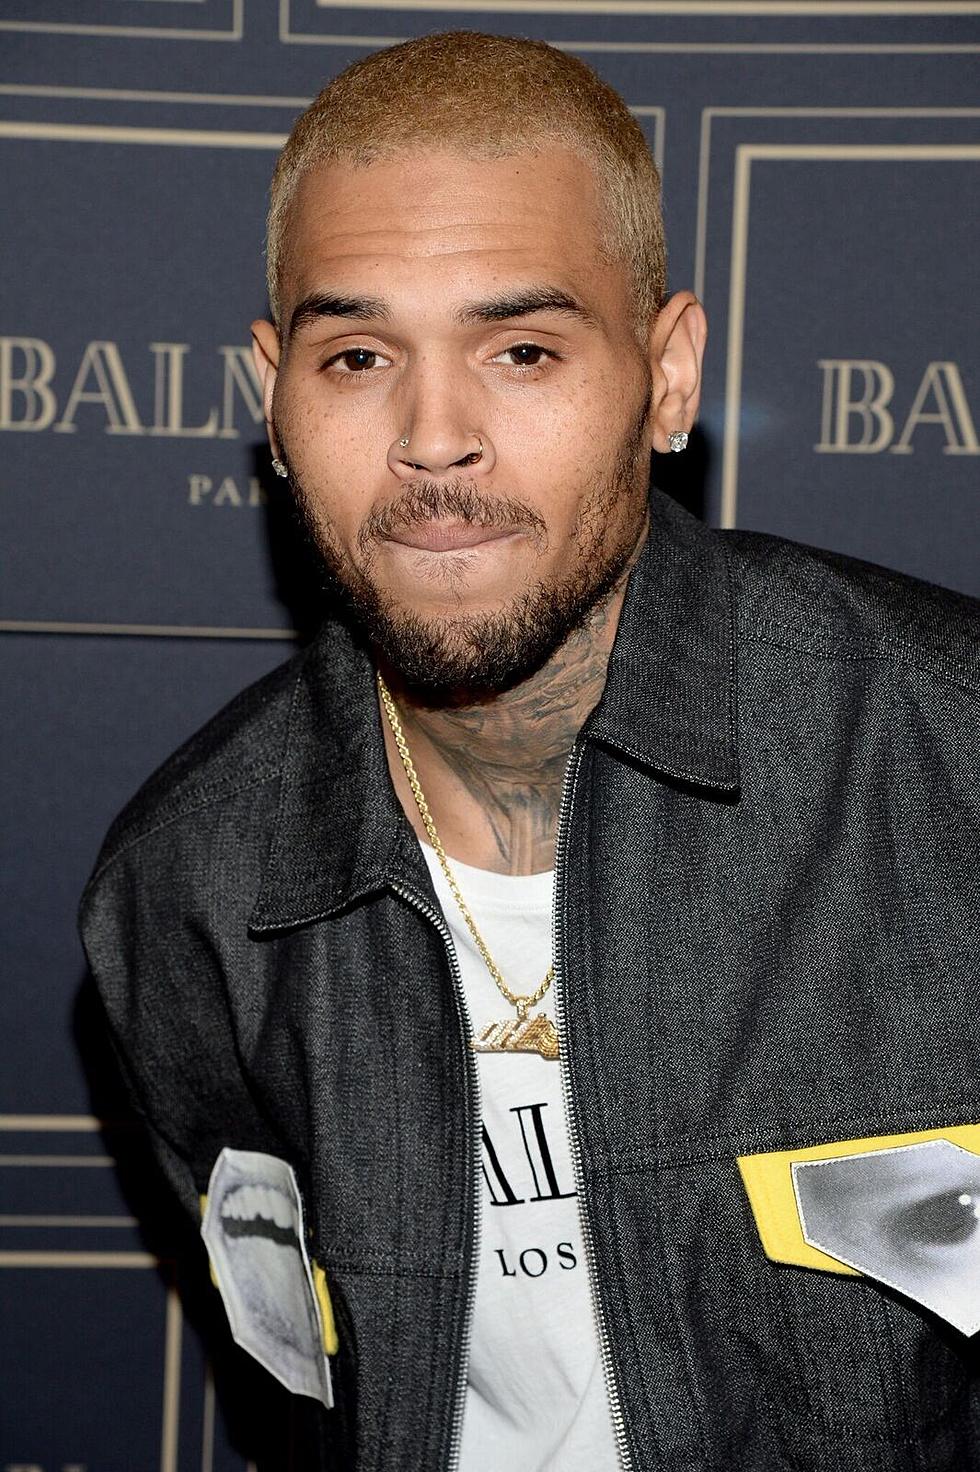 Chris Brown: “The Fight’s Off”